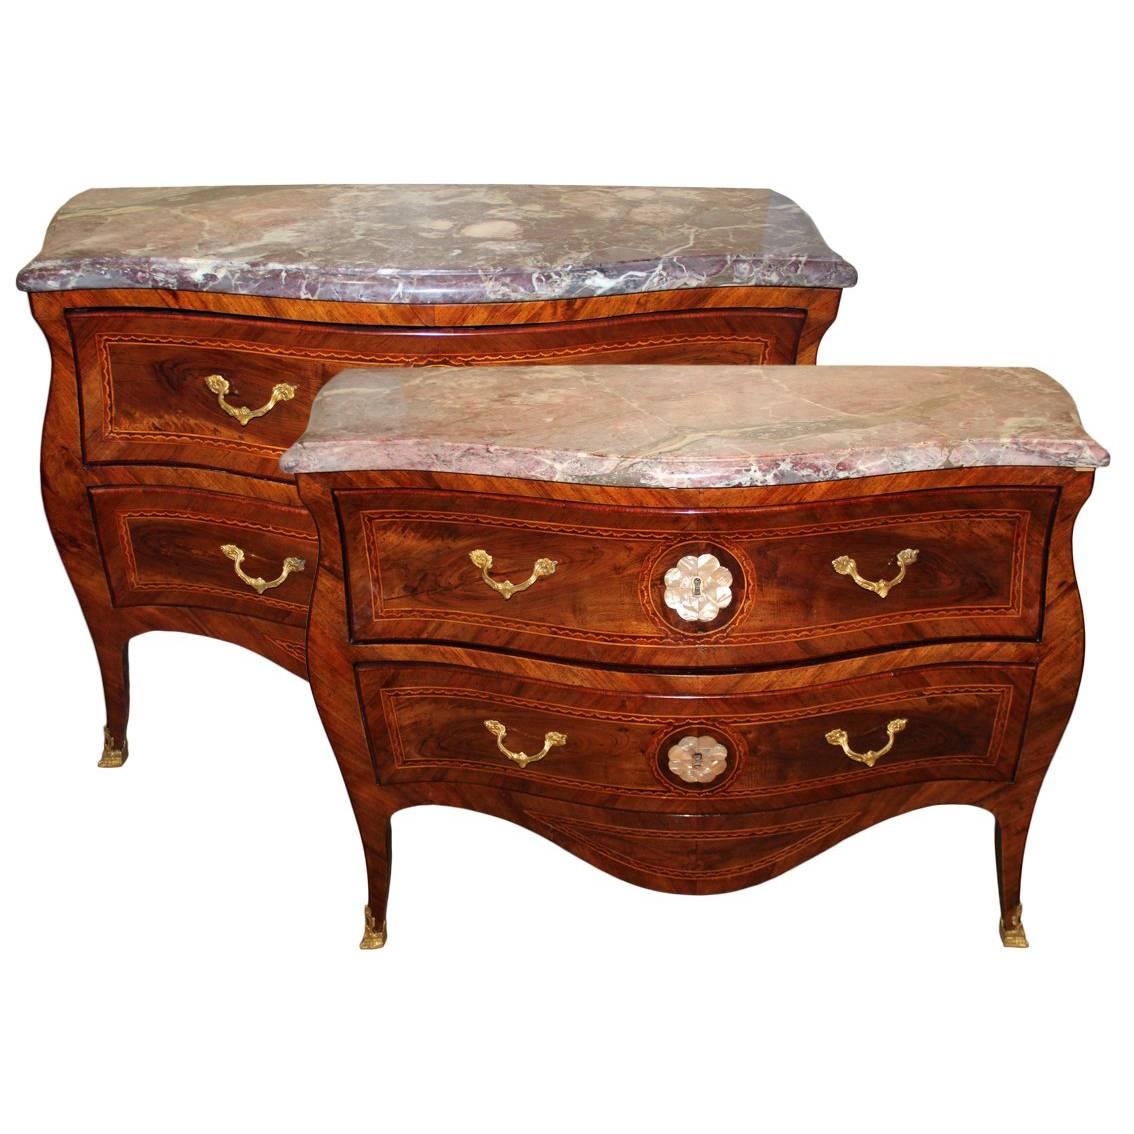 Pair of 18th Century Neapolitan Burl Walnut Parquetry Bombe Serpentine Commodes For Sale